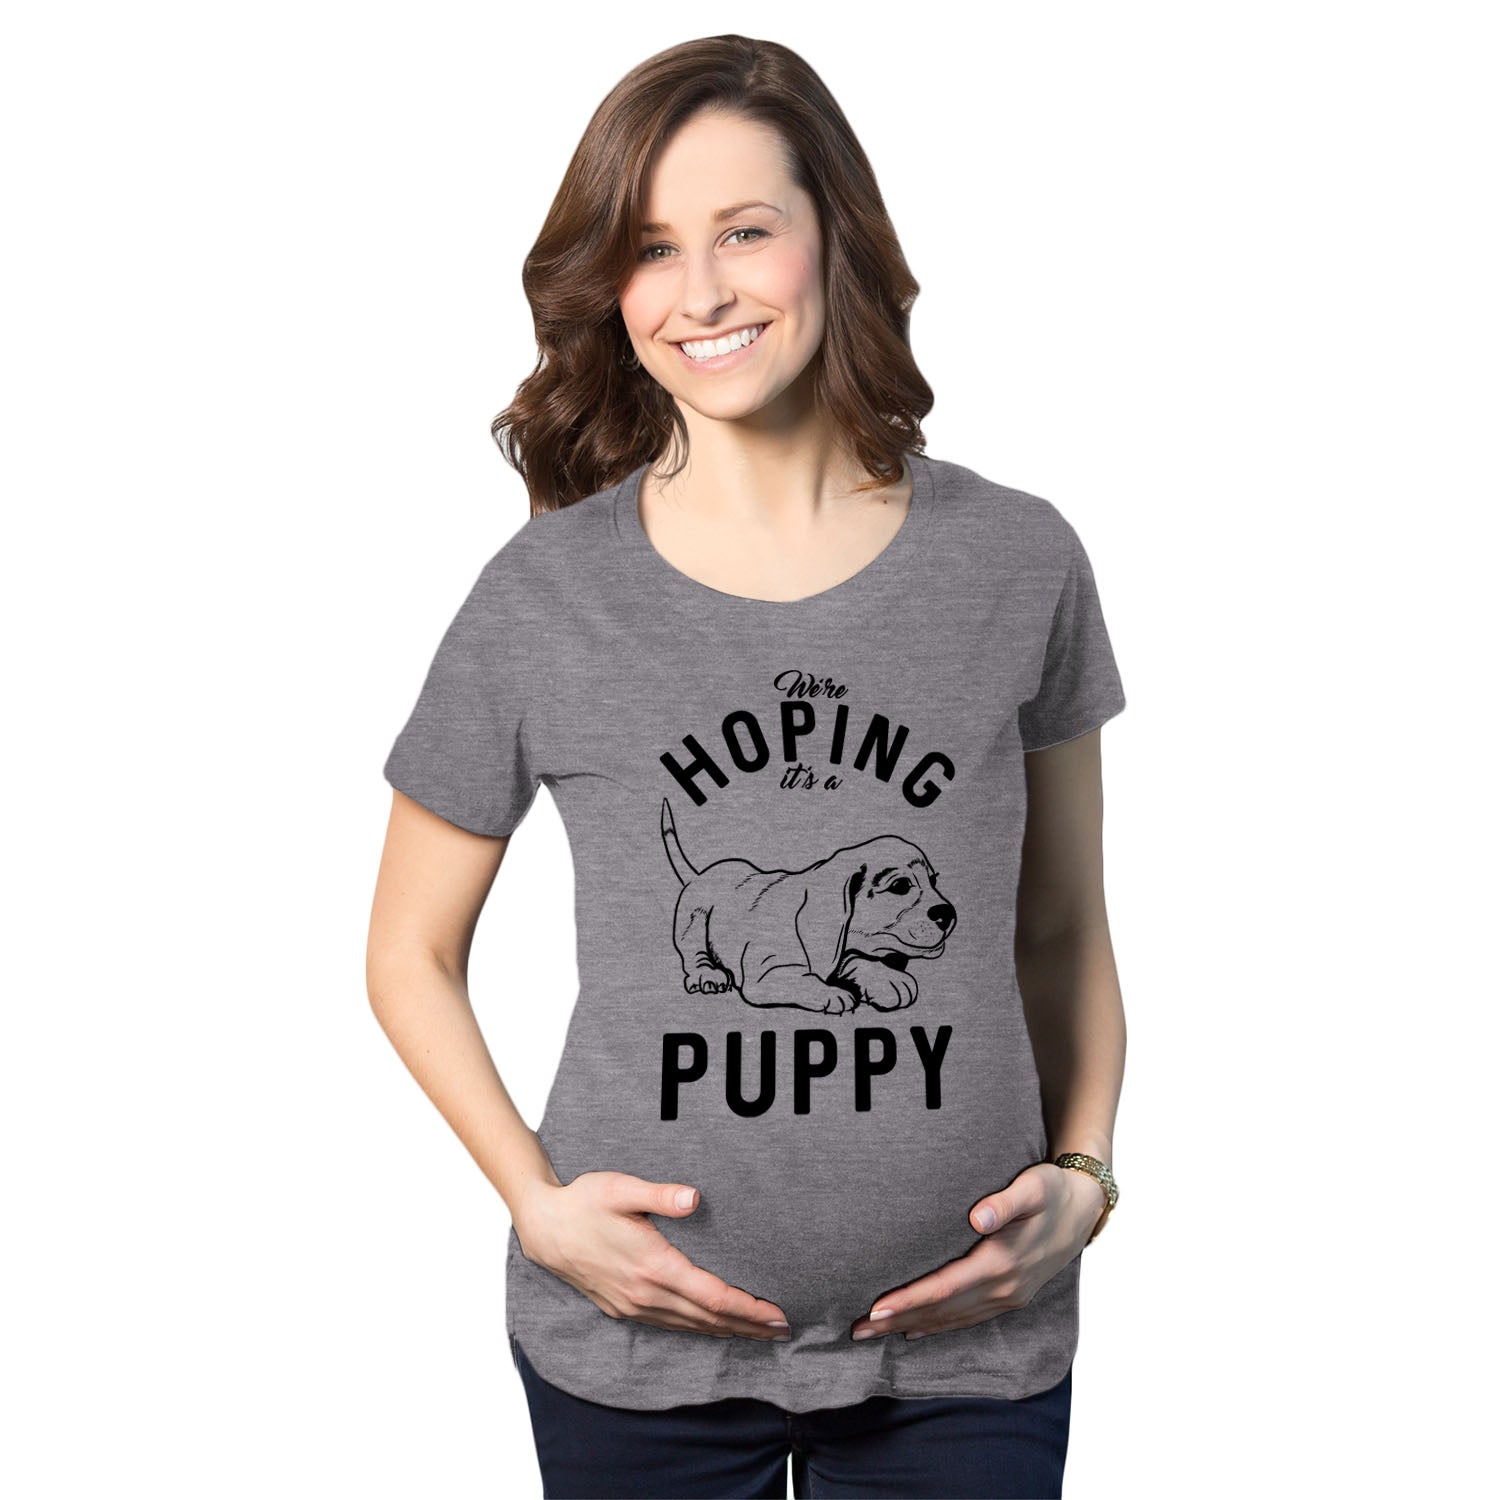 Funny Dark Heather Grey Hoping It's A Puppy Maternity T Shirt Nerdy Dog Sarcastic Tee